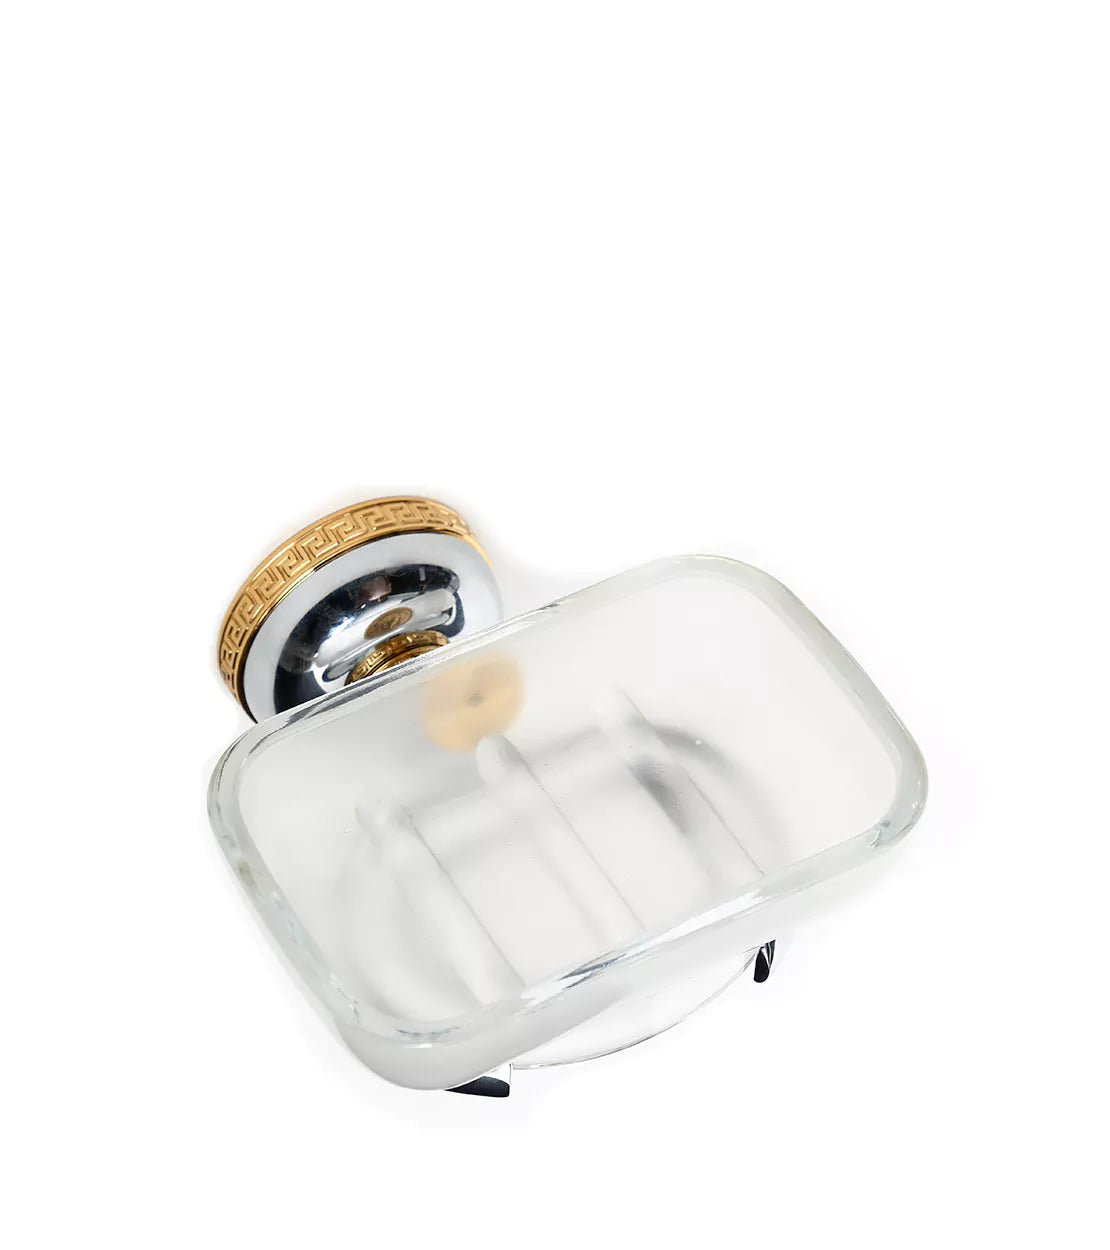 VERSACE - Opaque Soap Holder with Stand - The Perfect Soap Holder for a Clean and Clutter-Free Bathroom